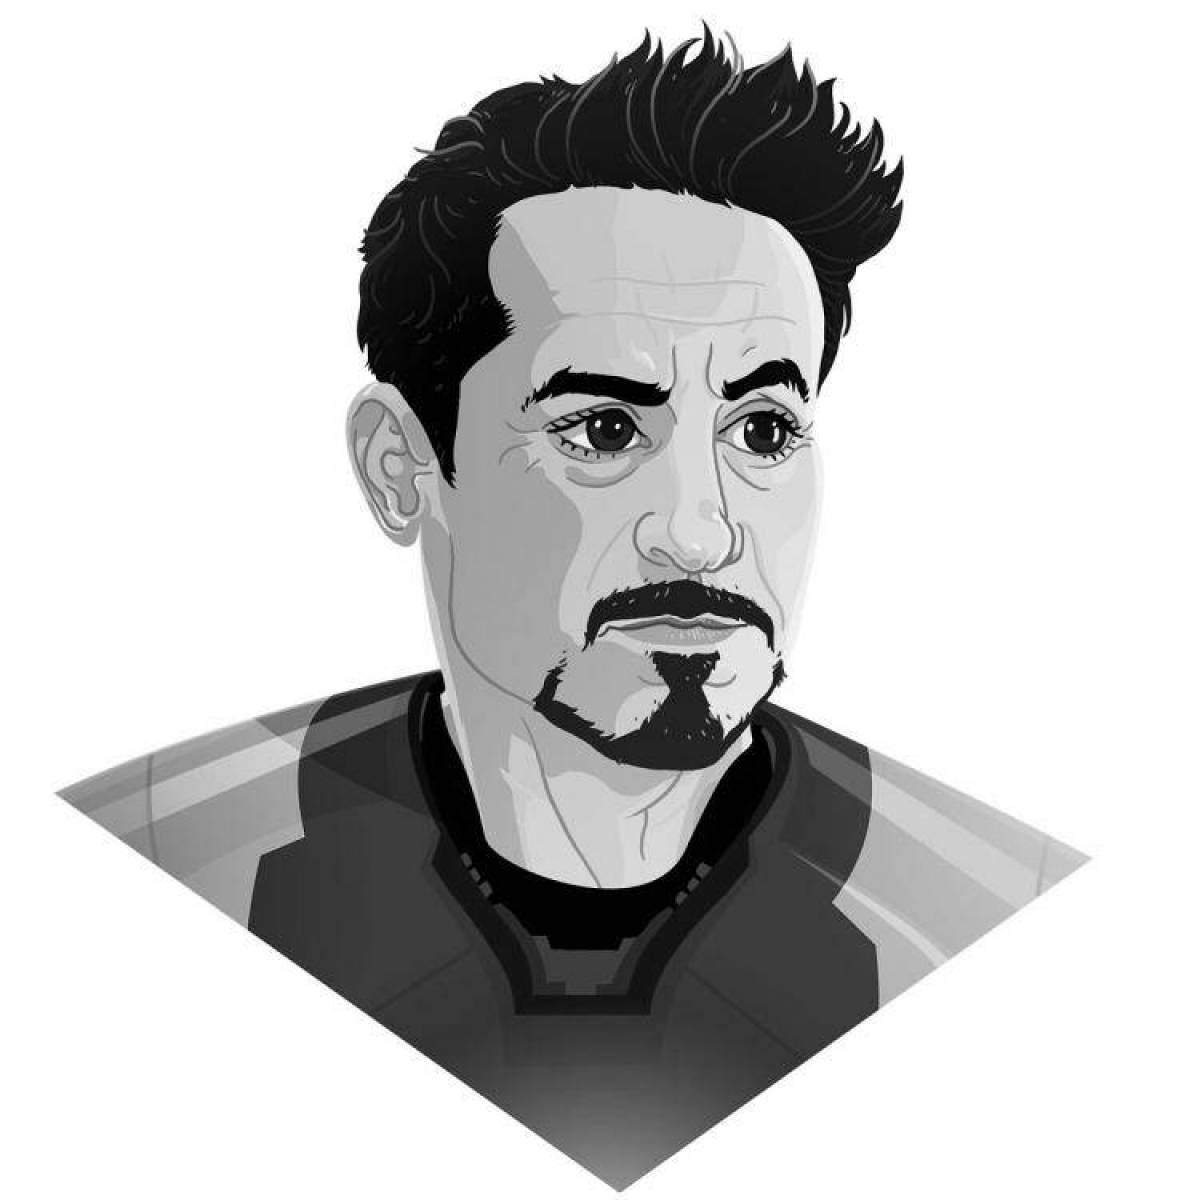 Tony stark's awesome coloring book